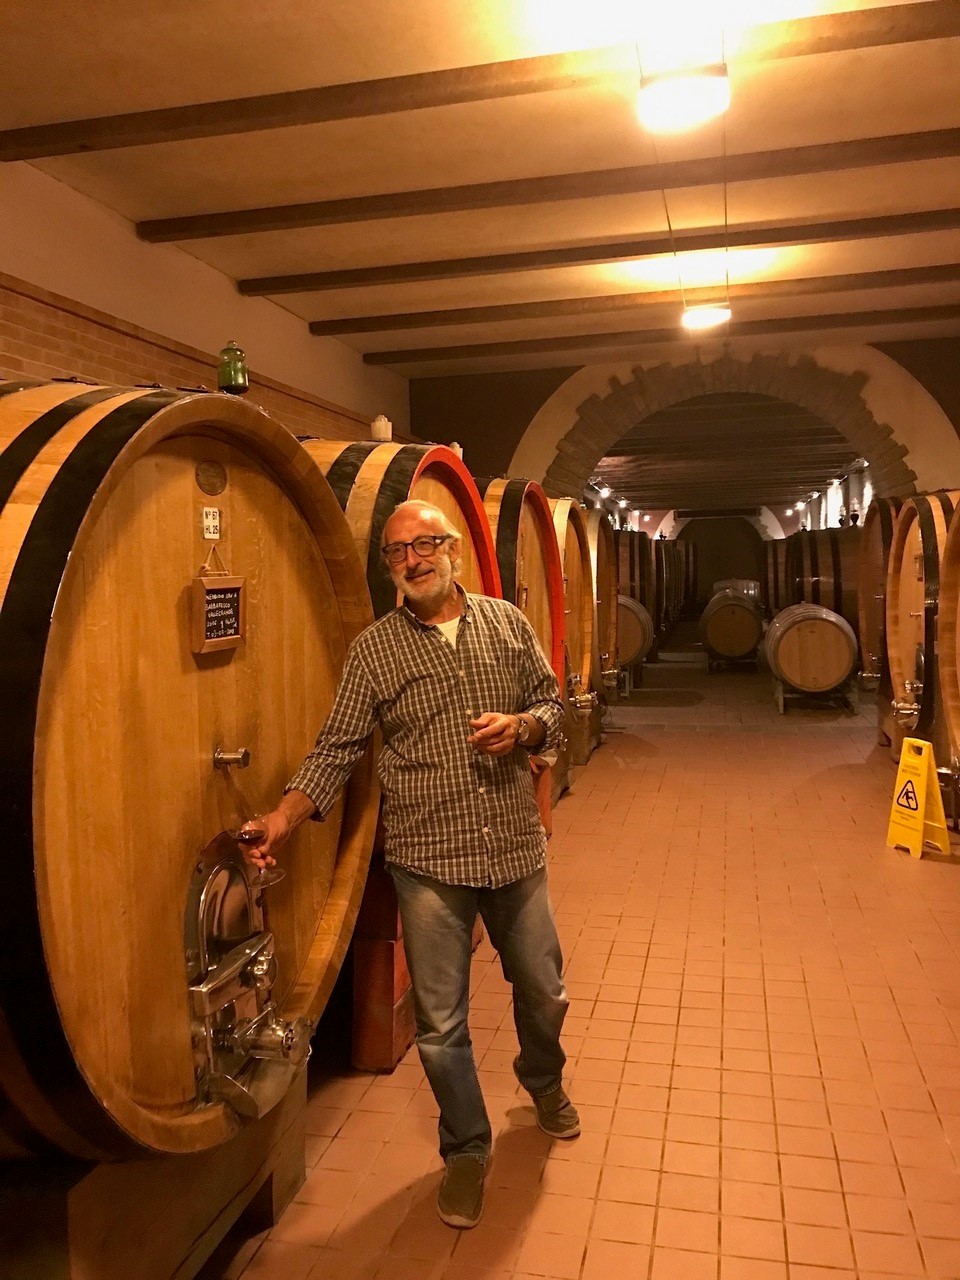 Pino Mantelli will be your mentor, guide,
chaufeur, and conceirge as you explore casks full of piedmont barolo wine